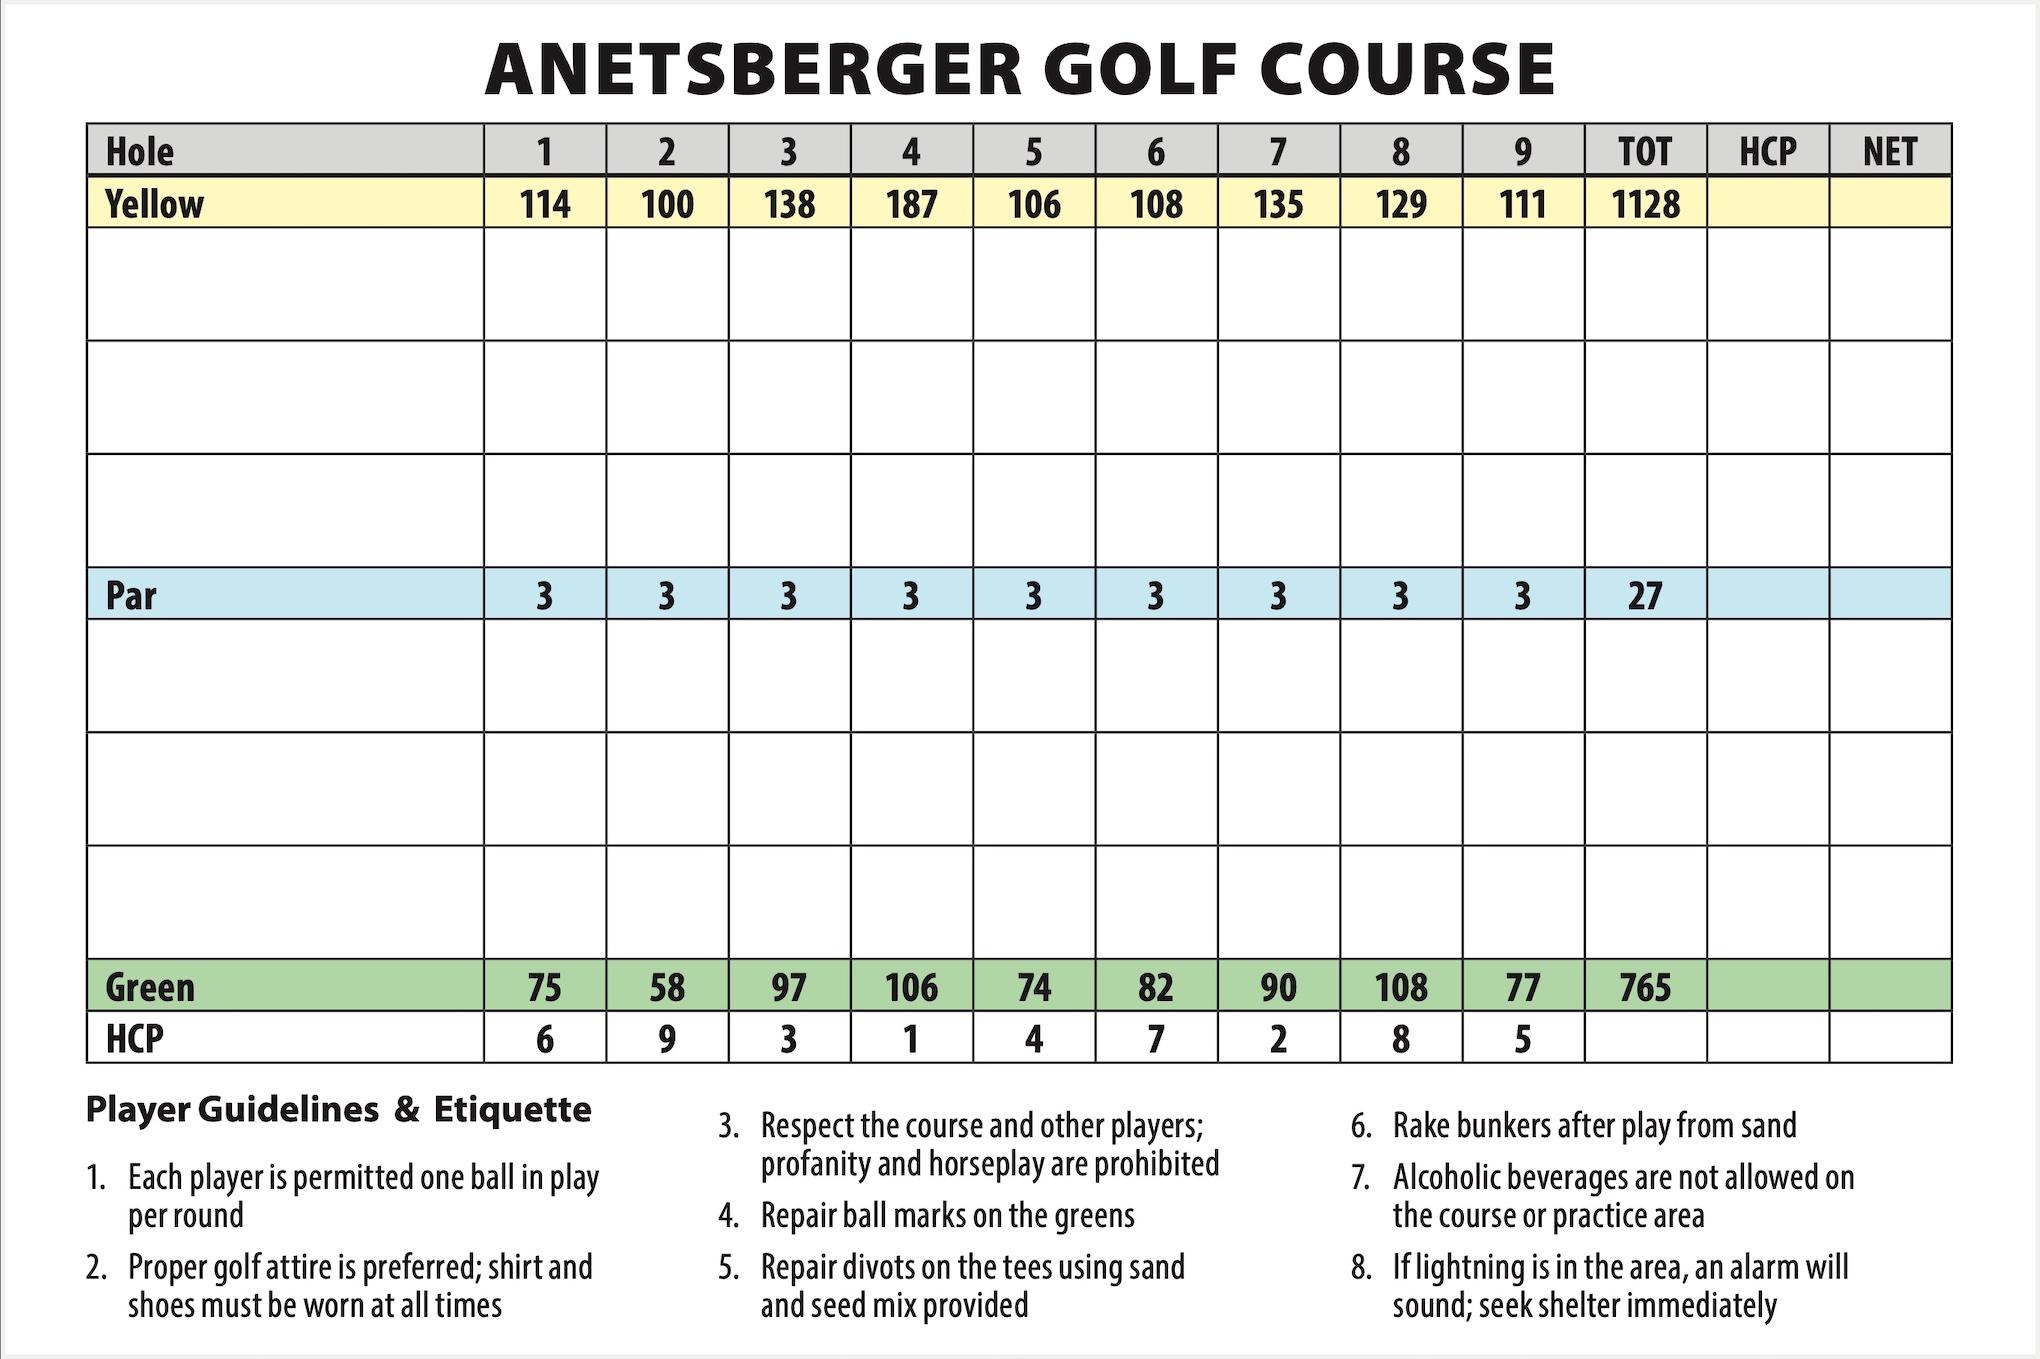 Scan of the scorecard from Anetsberger Golf Course in Northbrook, Illinois. 